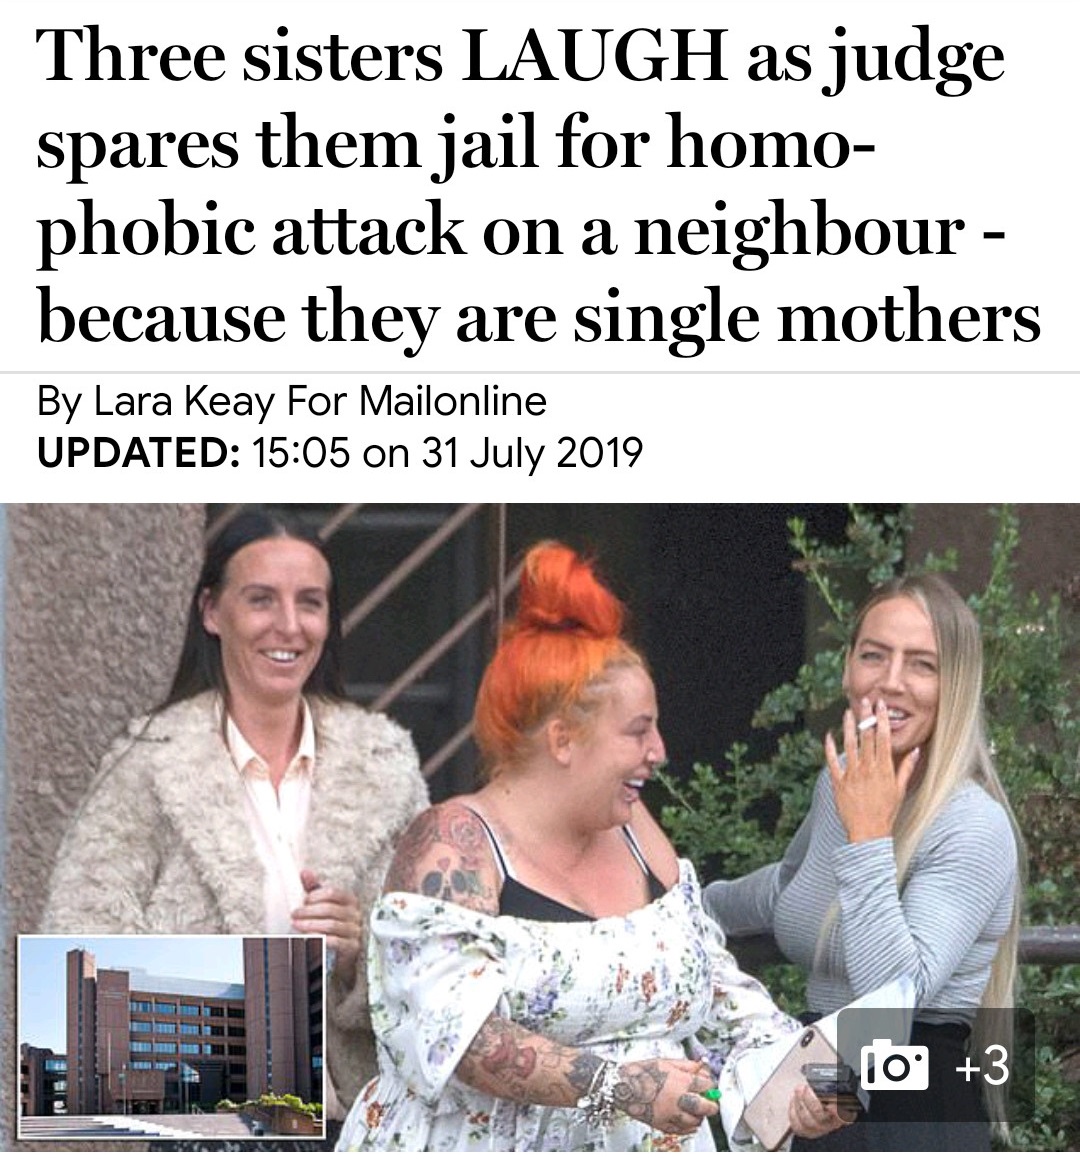 trust - Three sisters Laugh as judge spares them jail for homo phobic attack on a neighbour because they are single mothers By Lara Keay For Mailonline Updated on 10 3